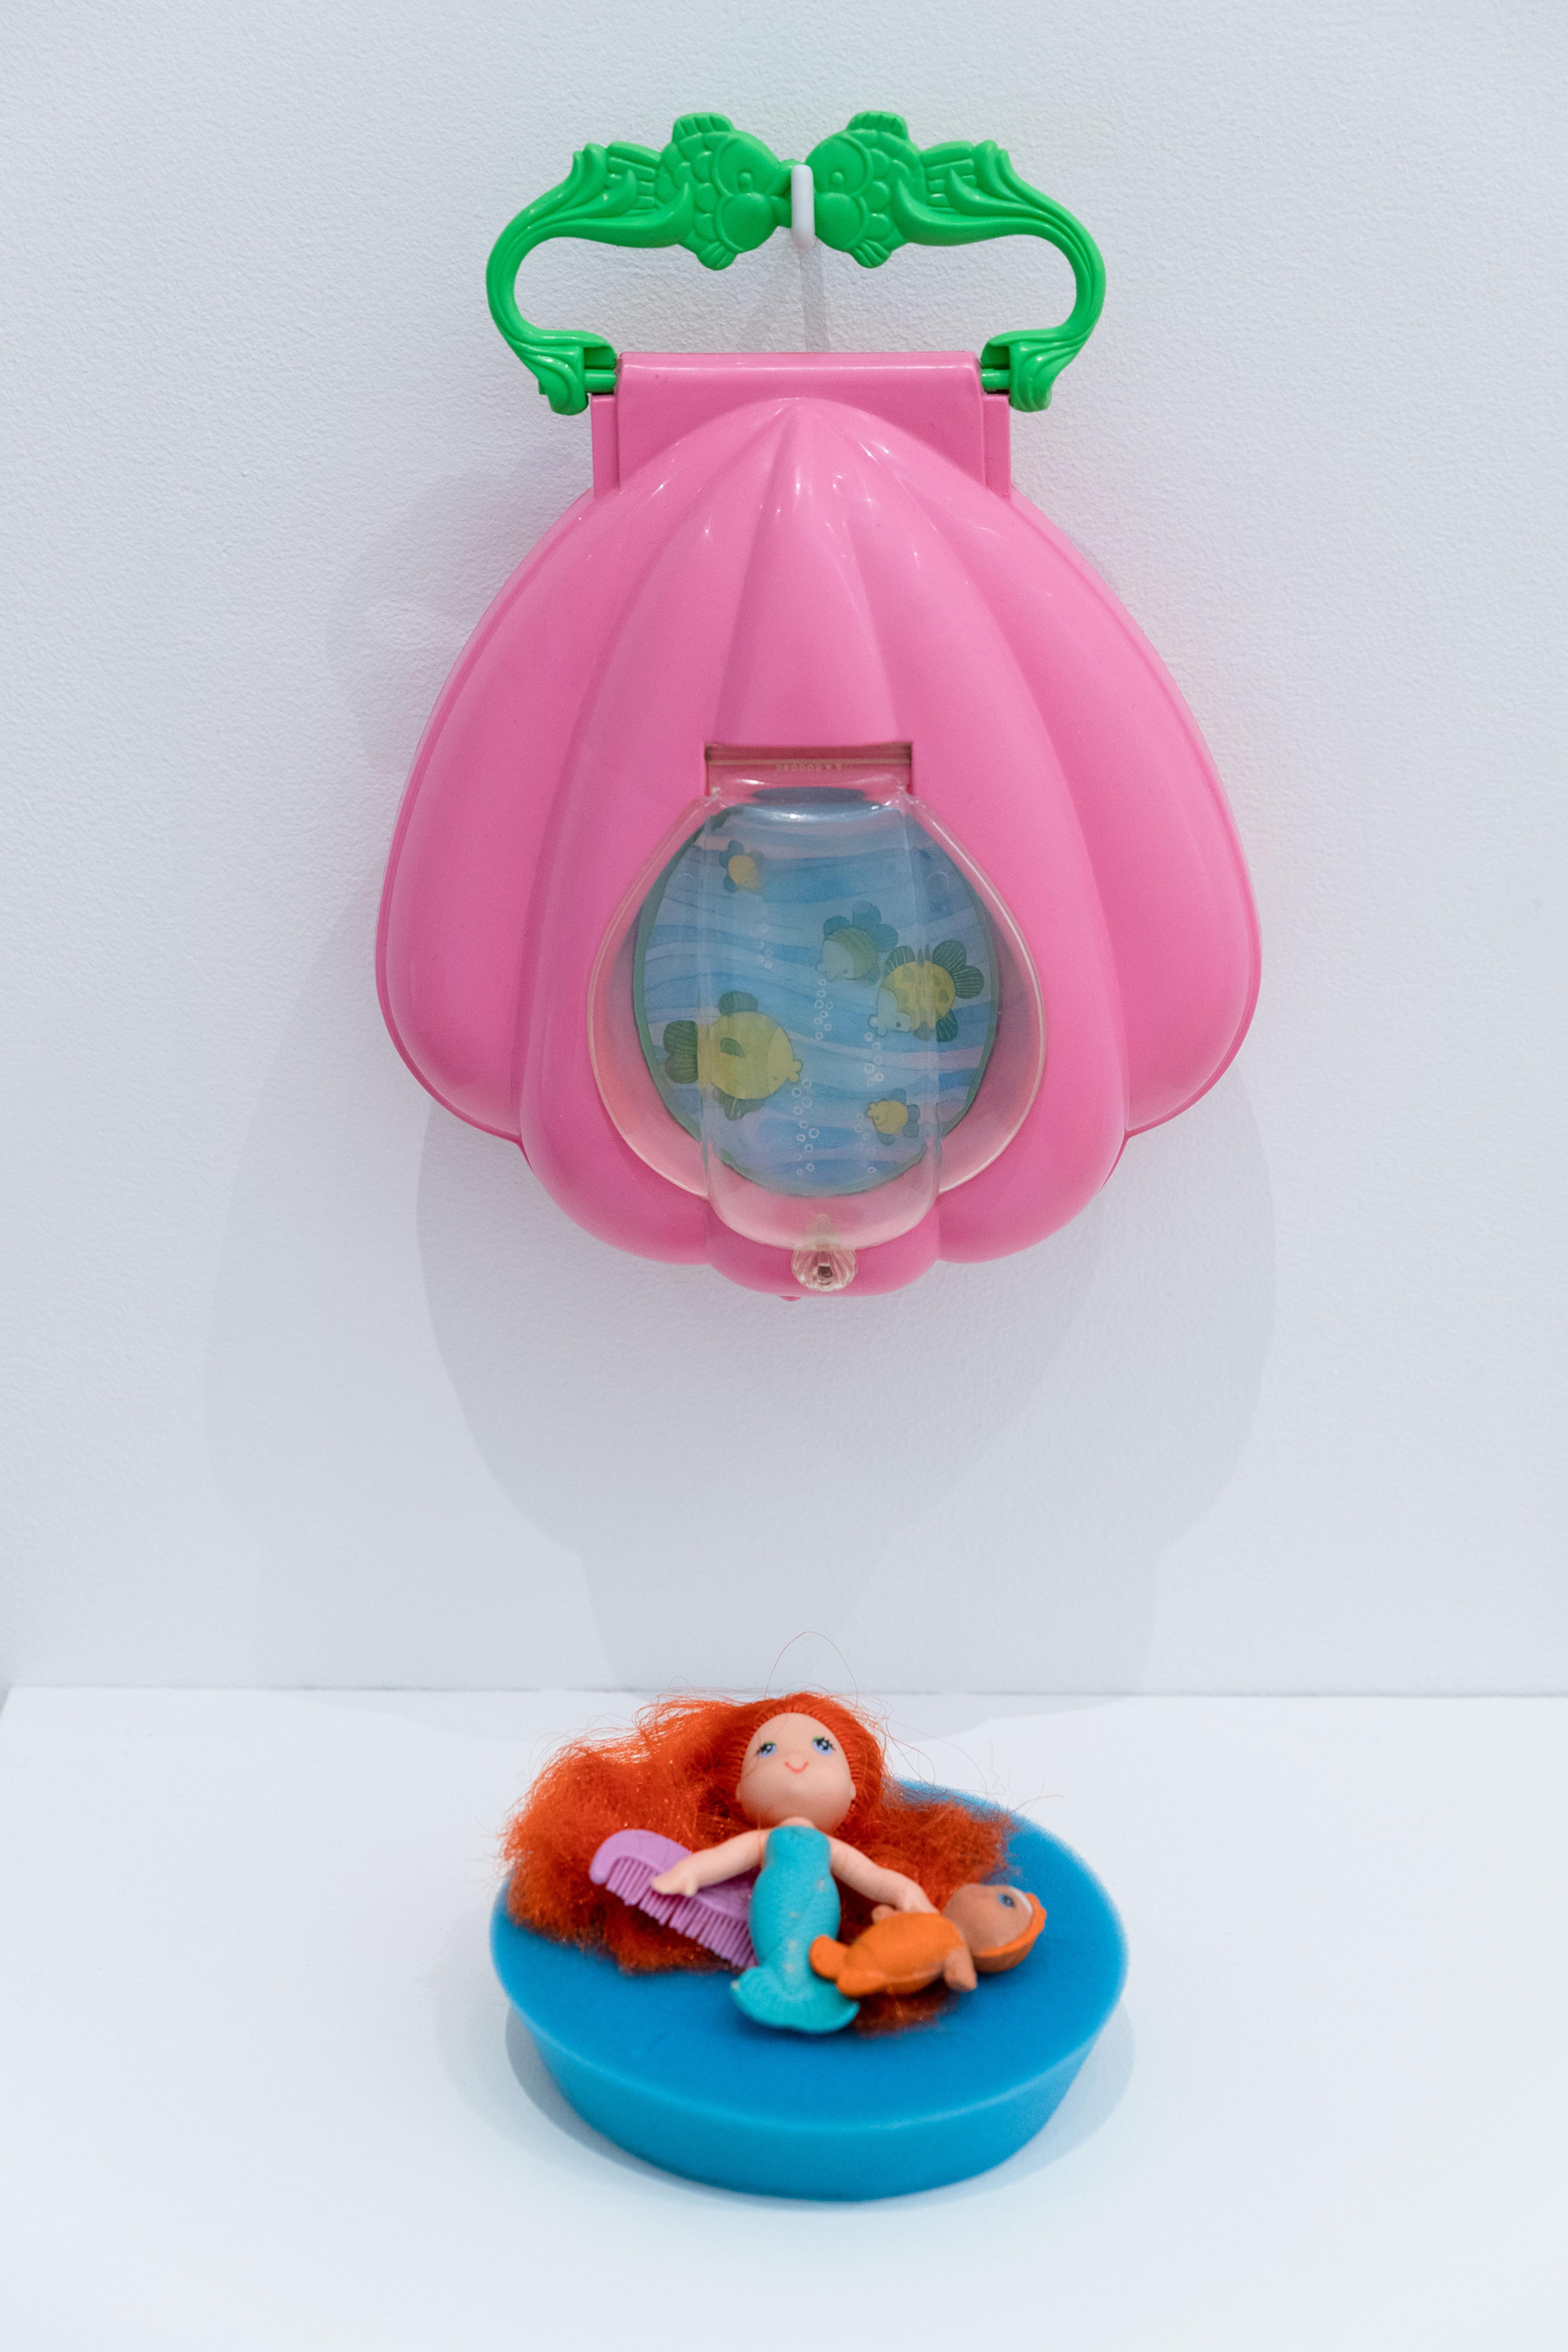 Coral, See Wees doll, 1979; Finella, See Wees baby doll, 1981; and See Wees carrying case with kissing fishes handle, 1980, both collection Megan Dunn and Fearne Crane. Installation view, Megan Dunn: The Mermaid Chronicles, Te Pātaka Toi Adam Art Gallery, Te Herenga Waka Victoria University of Wellington, 2022. Photo: Ted Whitaker